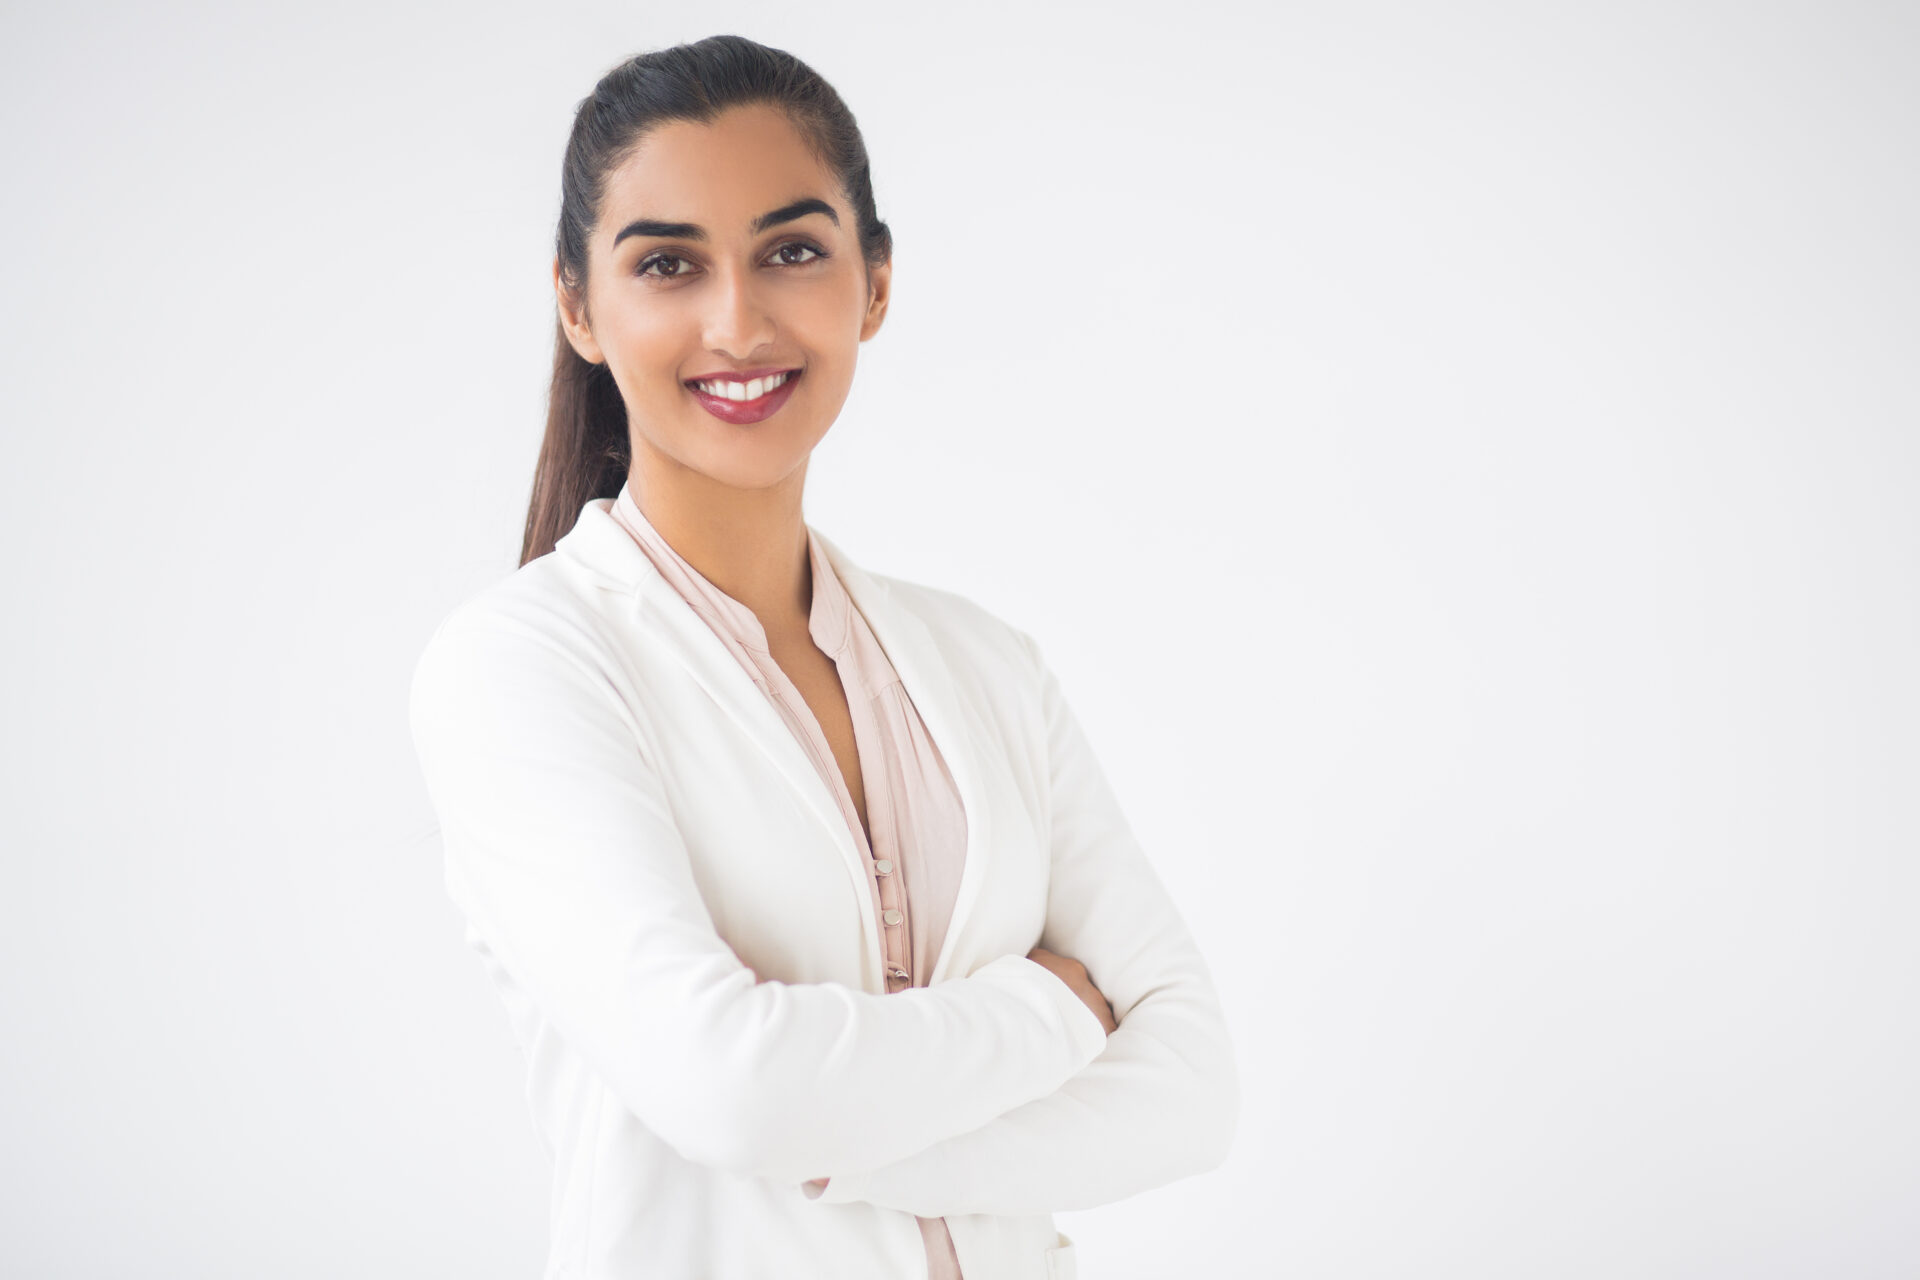 Closeup portrait of smiling young pretty Indian business woman looking at camera and standing with arms crossed. Isolated view on white background.